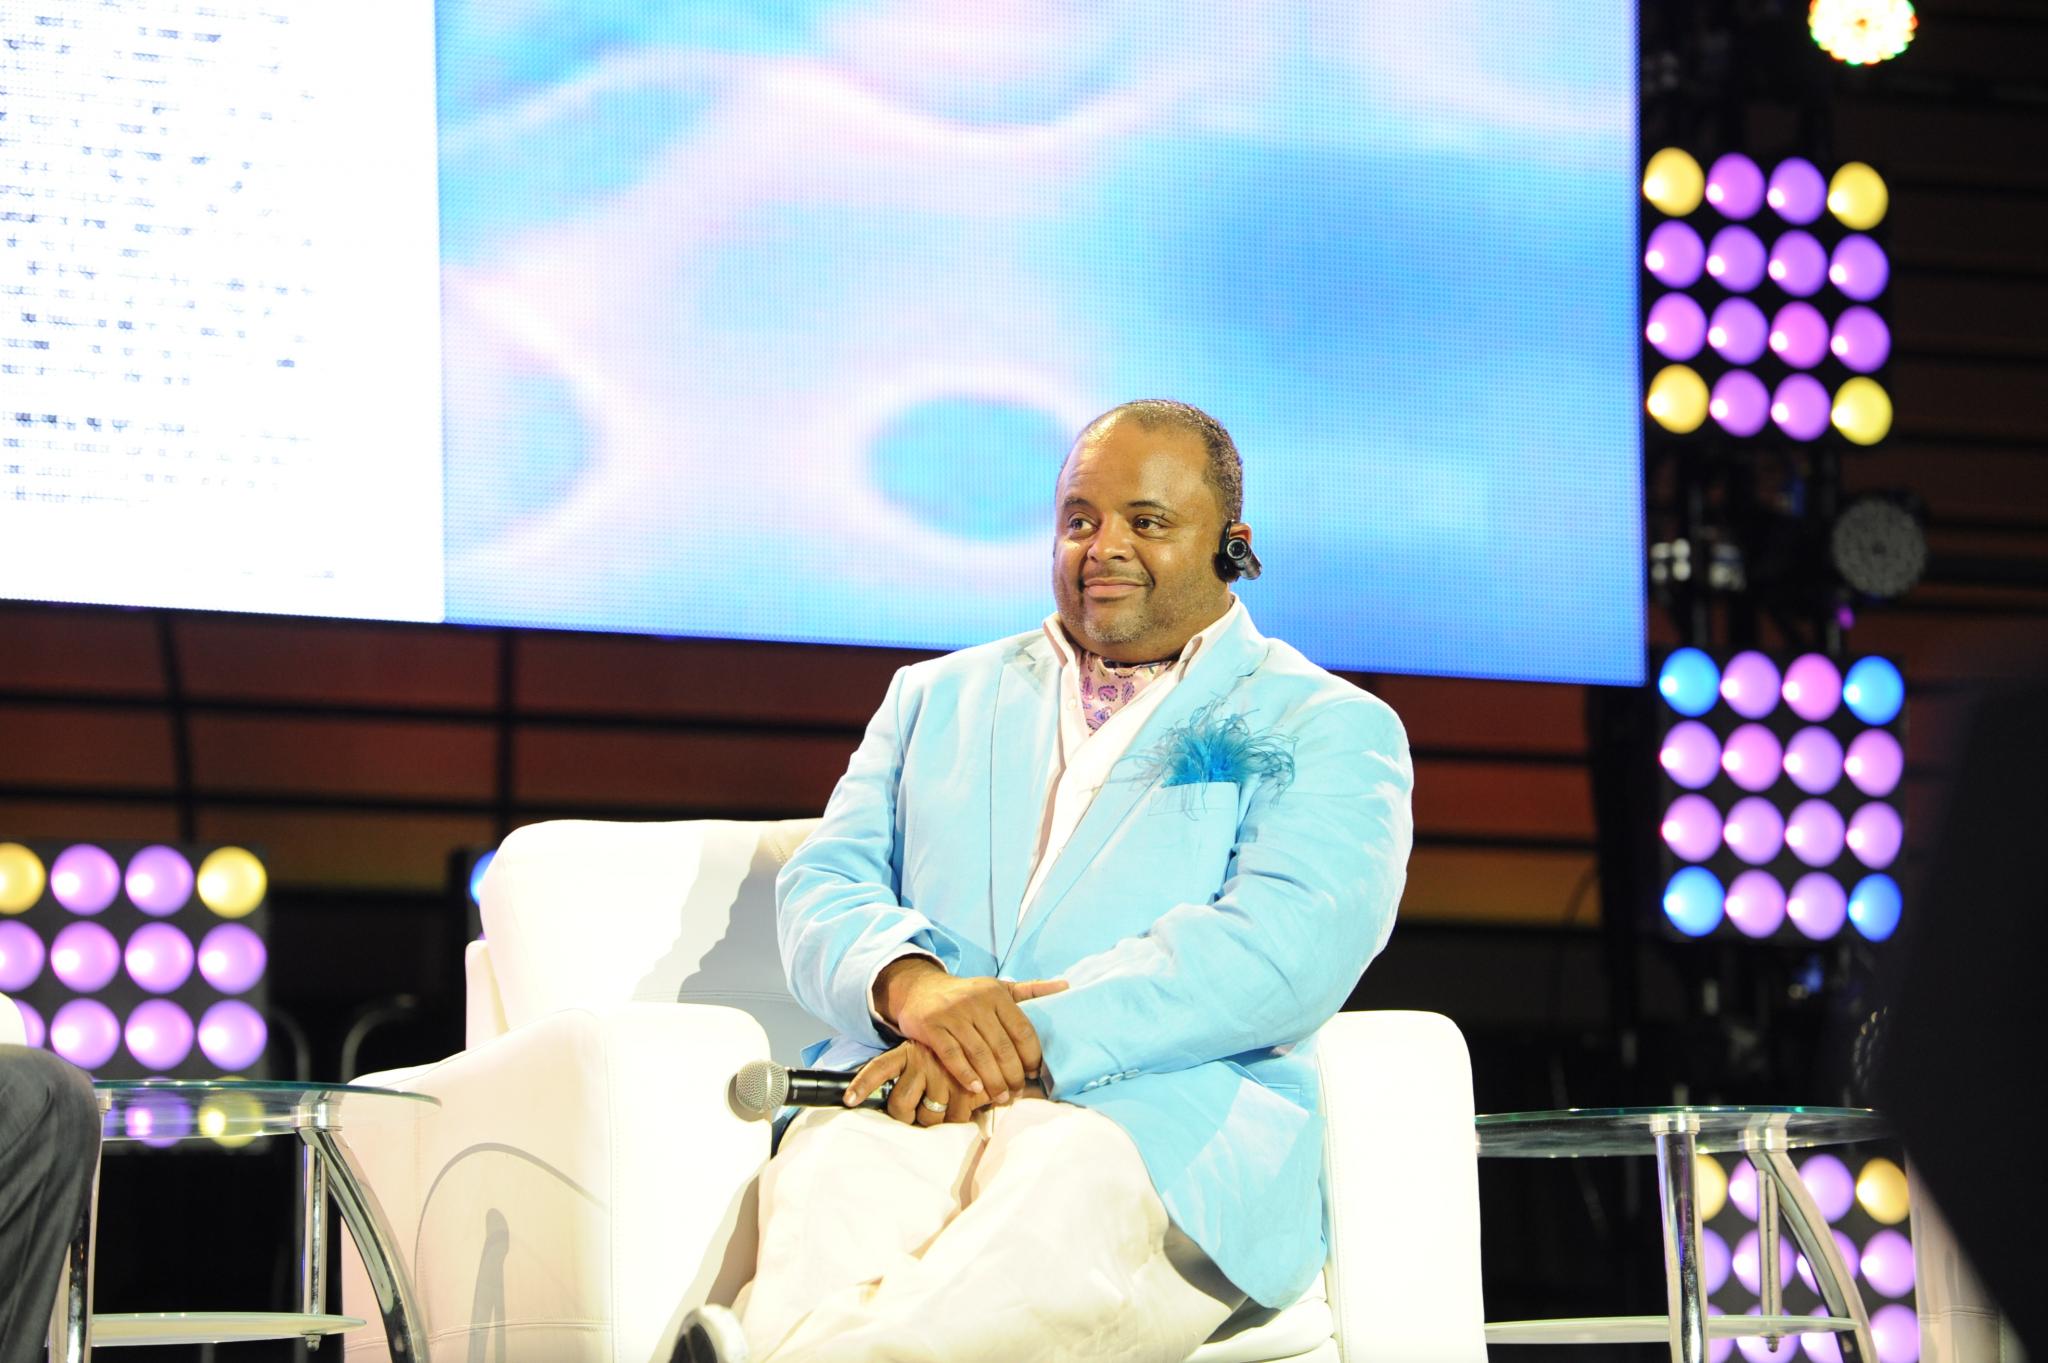 Here's What You Missed at the ESSENCE Festival's Convention Center